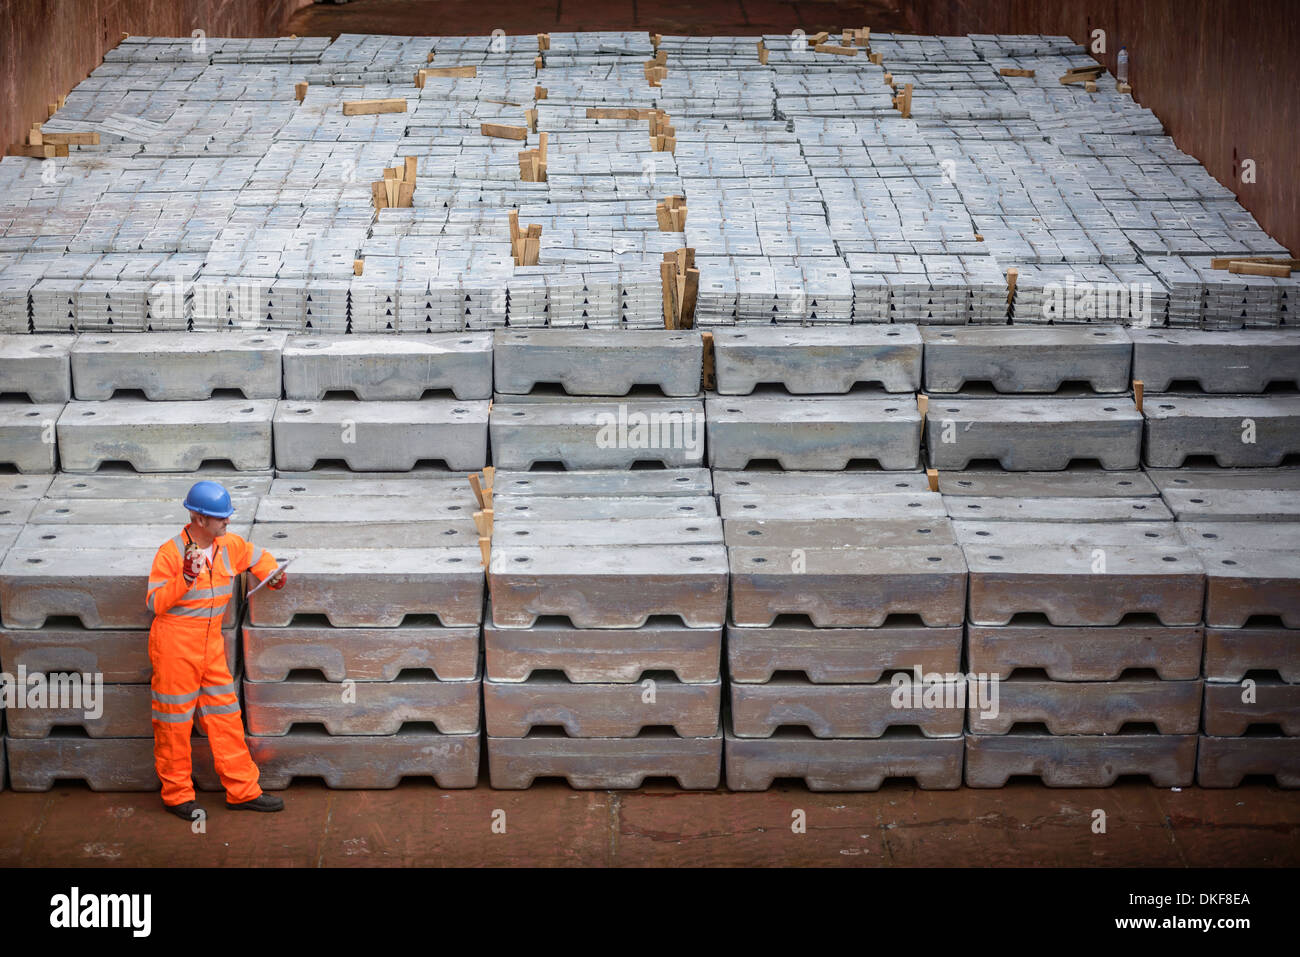 Worker standing next to metal ingots in ship's hold Stock Photo